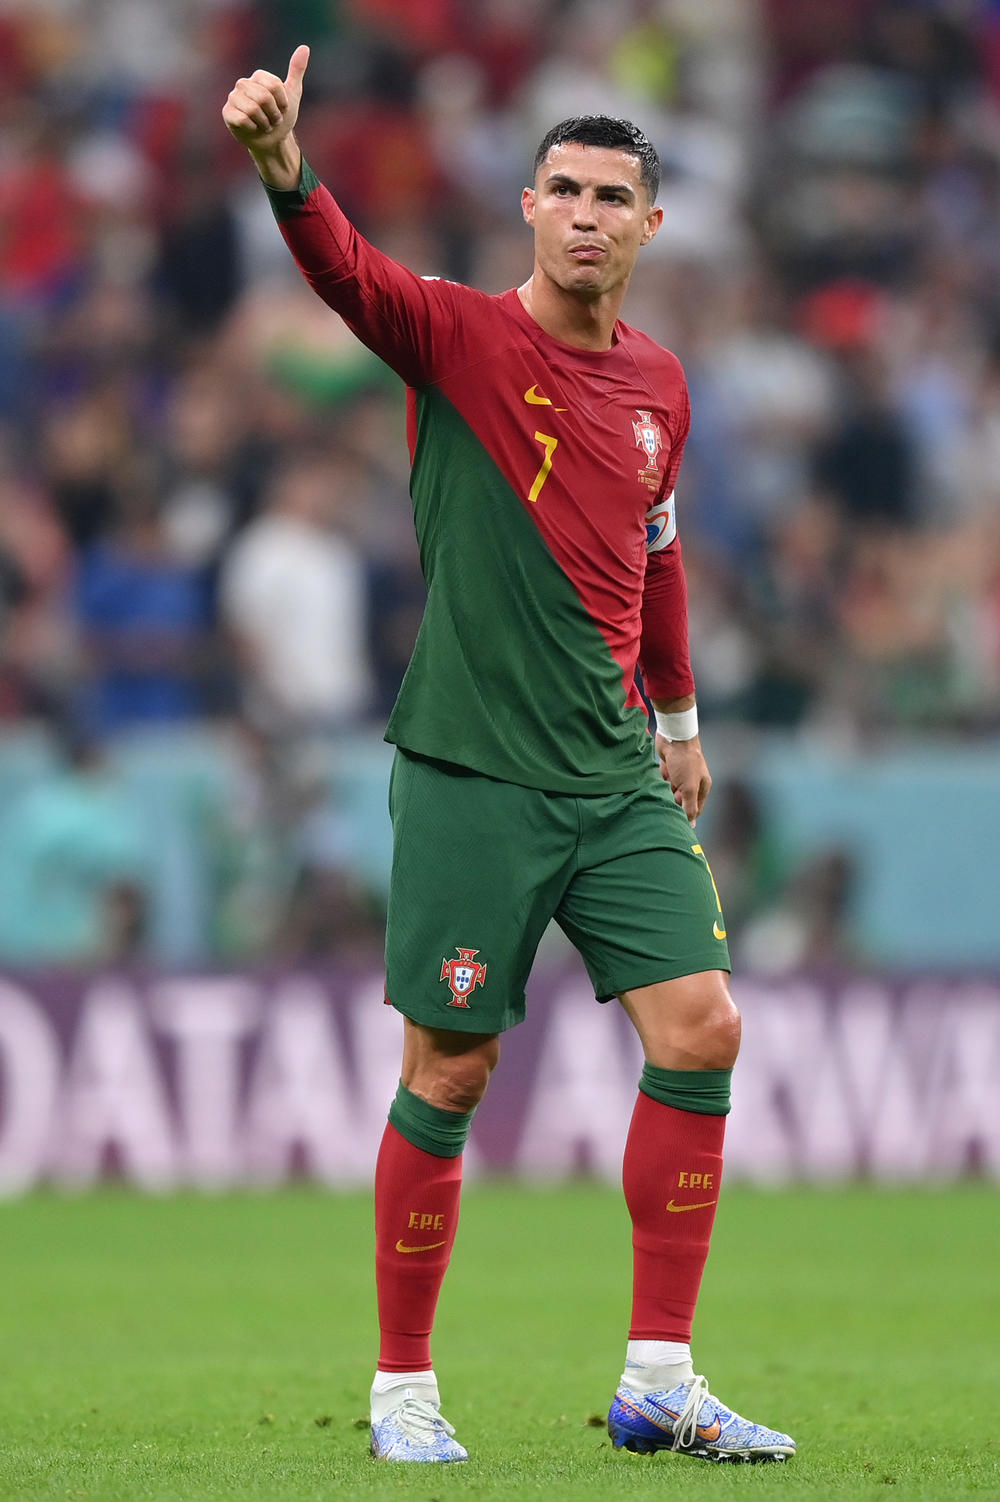 Cristiano Ronaldo of Portugal during the team's victory over Switzerland during the round of 16 match on Tuesday.